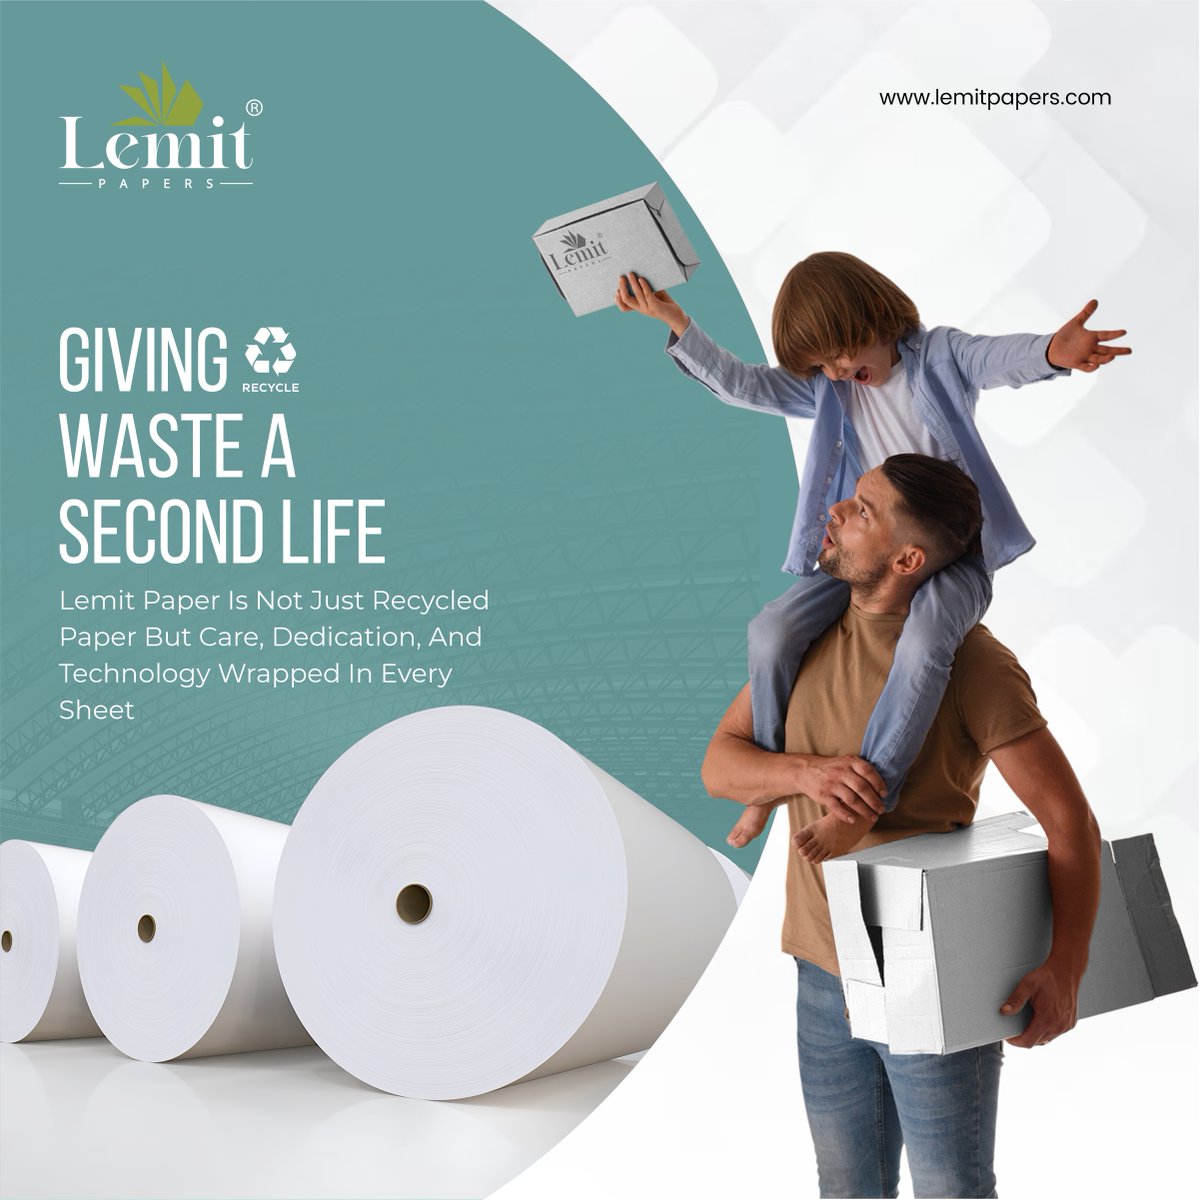 Lemit paper combines technology, care, and dedication into every sheet, making it more than just recycled paper.
.
For More Info visit website:
lemitpapers.com
.
#duplexboard #paperboard #packaging #paperindustry #papermaking #papermanufacturer #LemitPapers